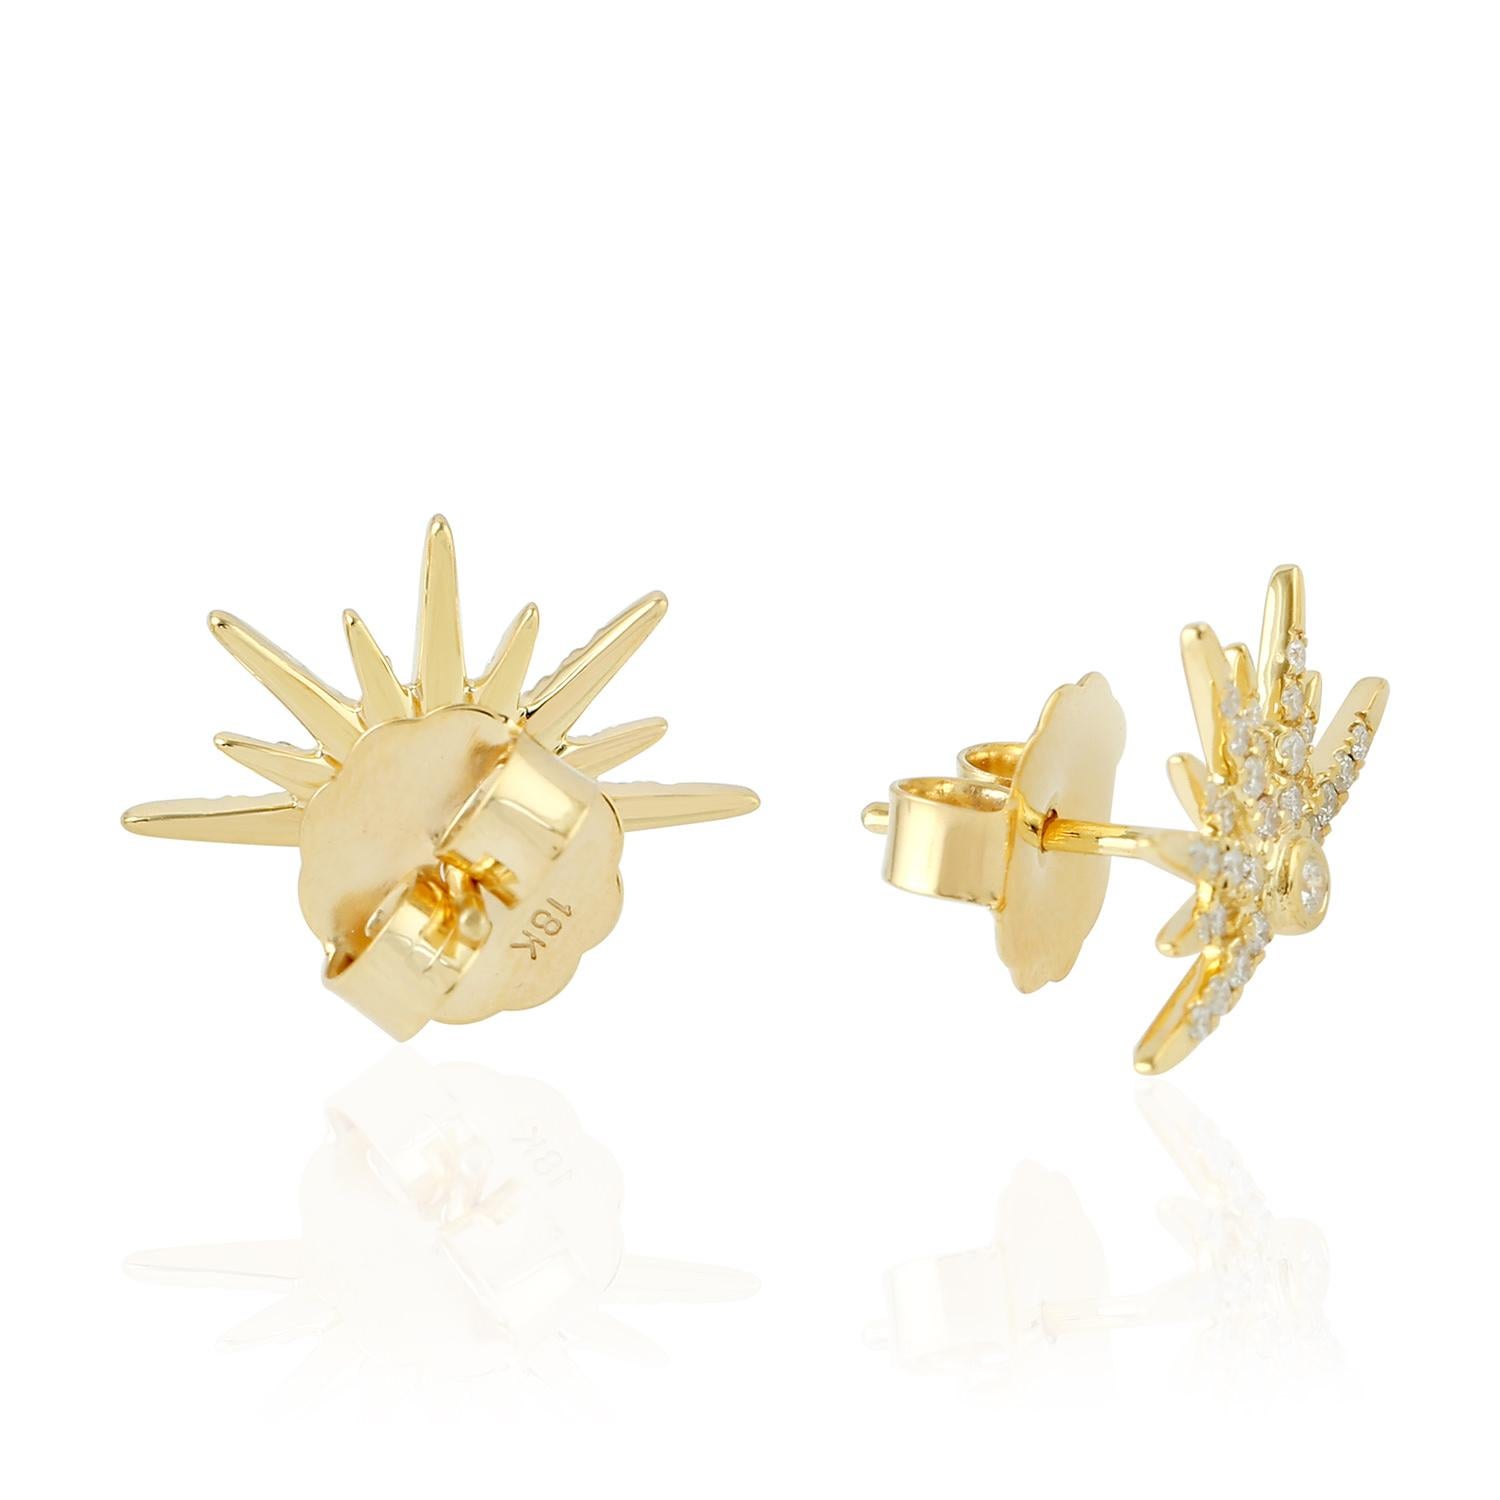 Cast from 18-karat gold, these studs earrings are hand set with .39 carats of sparkling diamonds. Also available in white & rose gold.  See other matching pieces of Sun Collection.

FOLLOW  MEGHNA JEWELS storefront to view the latest collection &